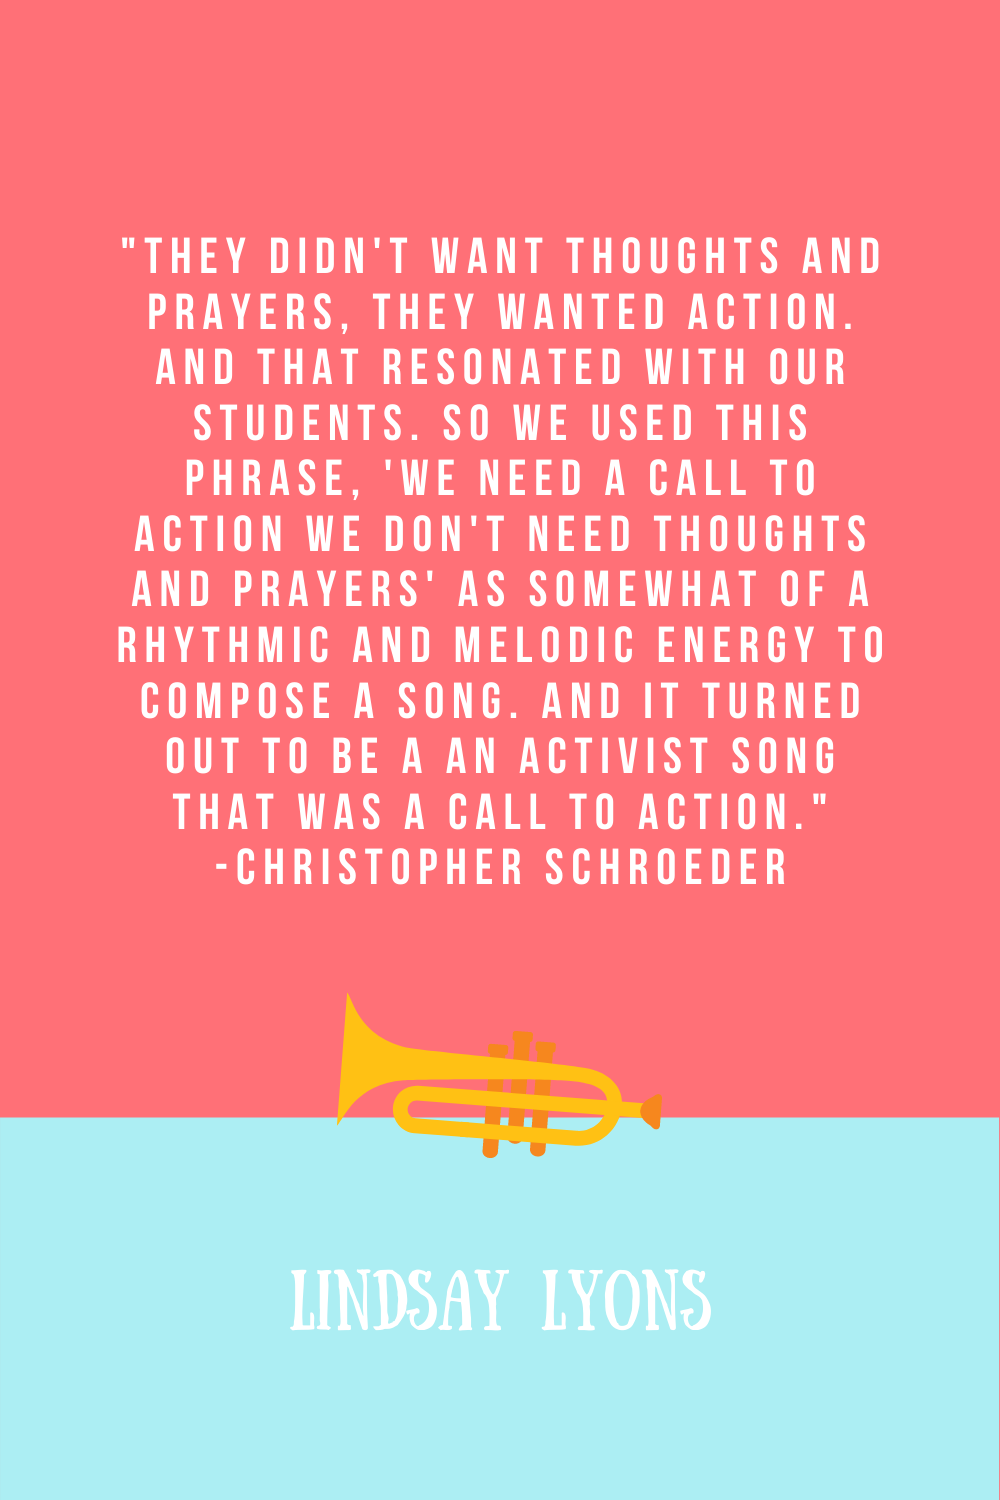 In this podcast episode, we are talking with Christopher Schroeder of the Boston Music Project about using music to teach justice. Christopher is a Boston Future leader who explains to us how music enhances the child. It is his vision to develop music communities in our schools which allow the students to dream big, trust the artistic process, and not to rely as much on test scores, but to develop the whole child.